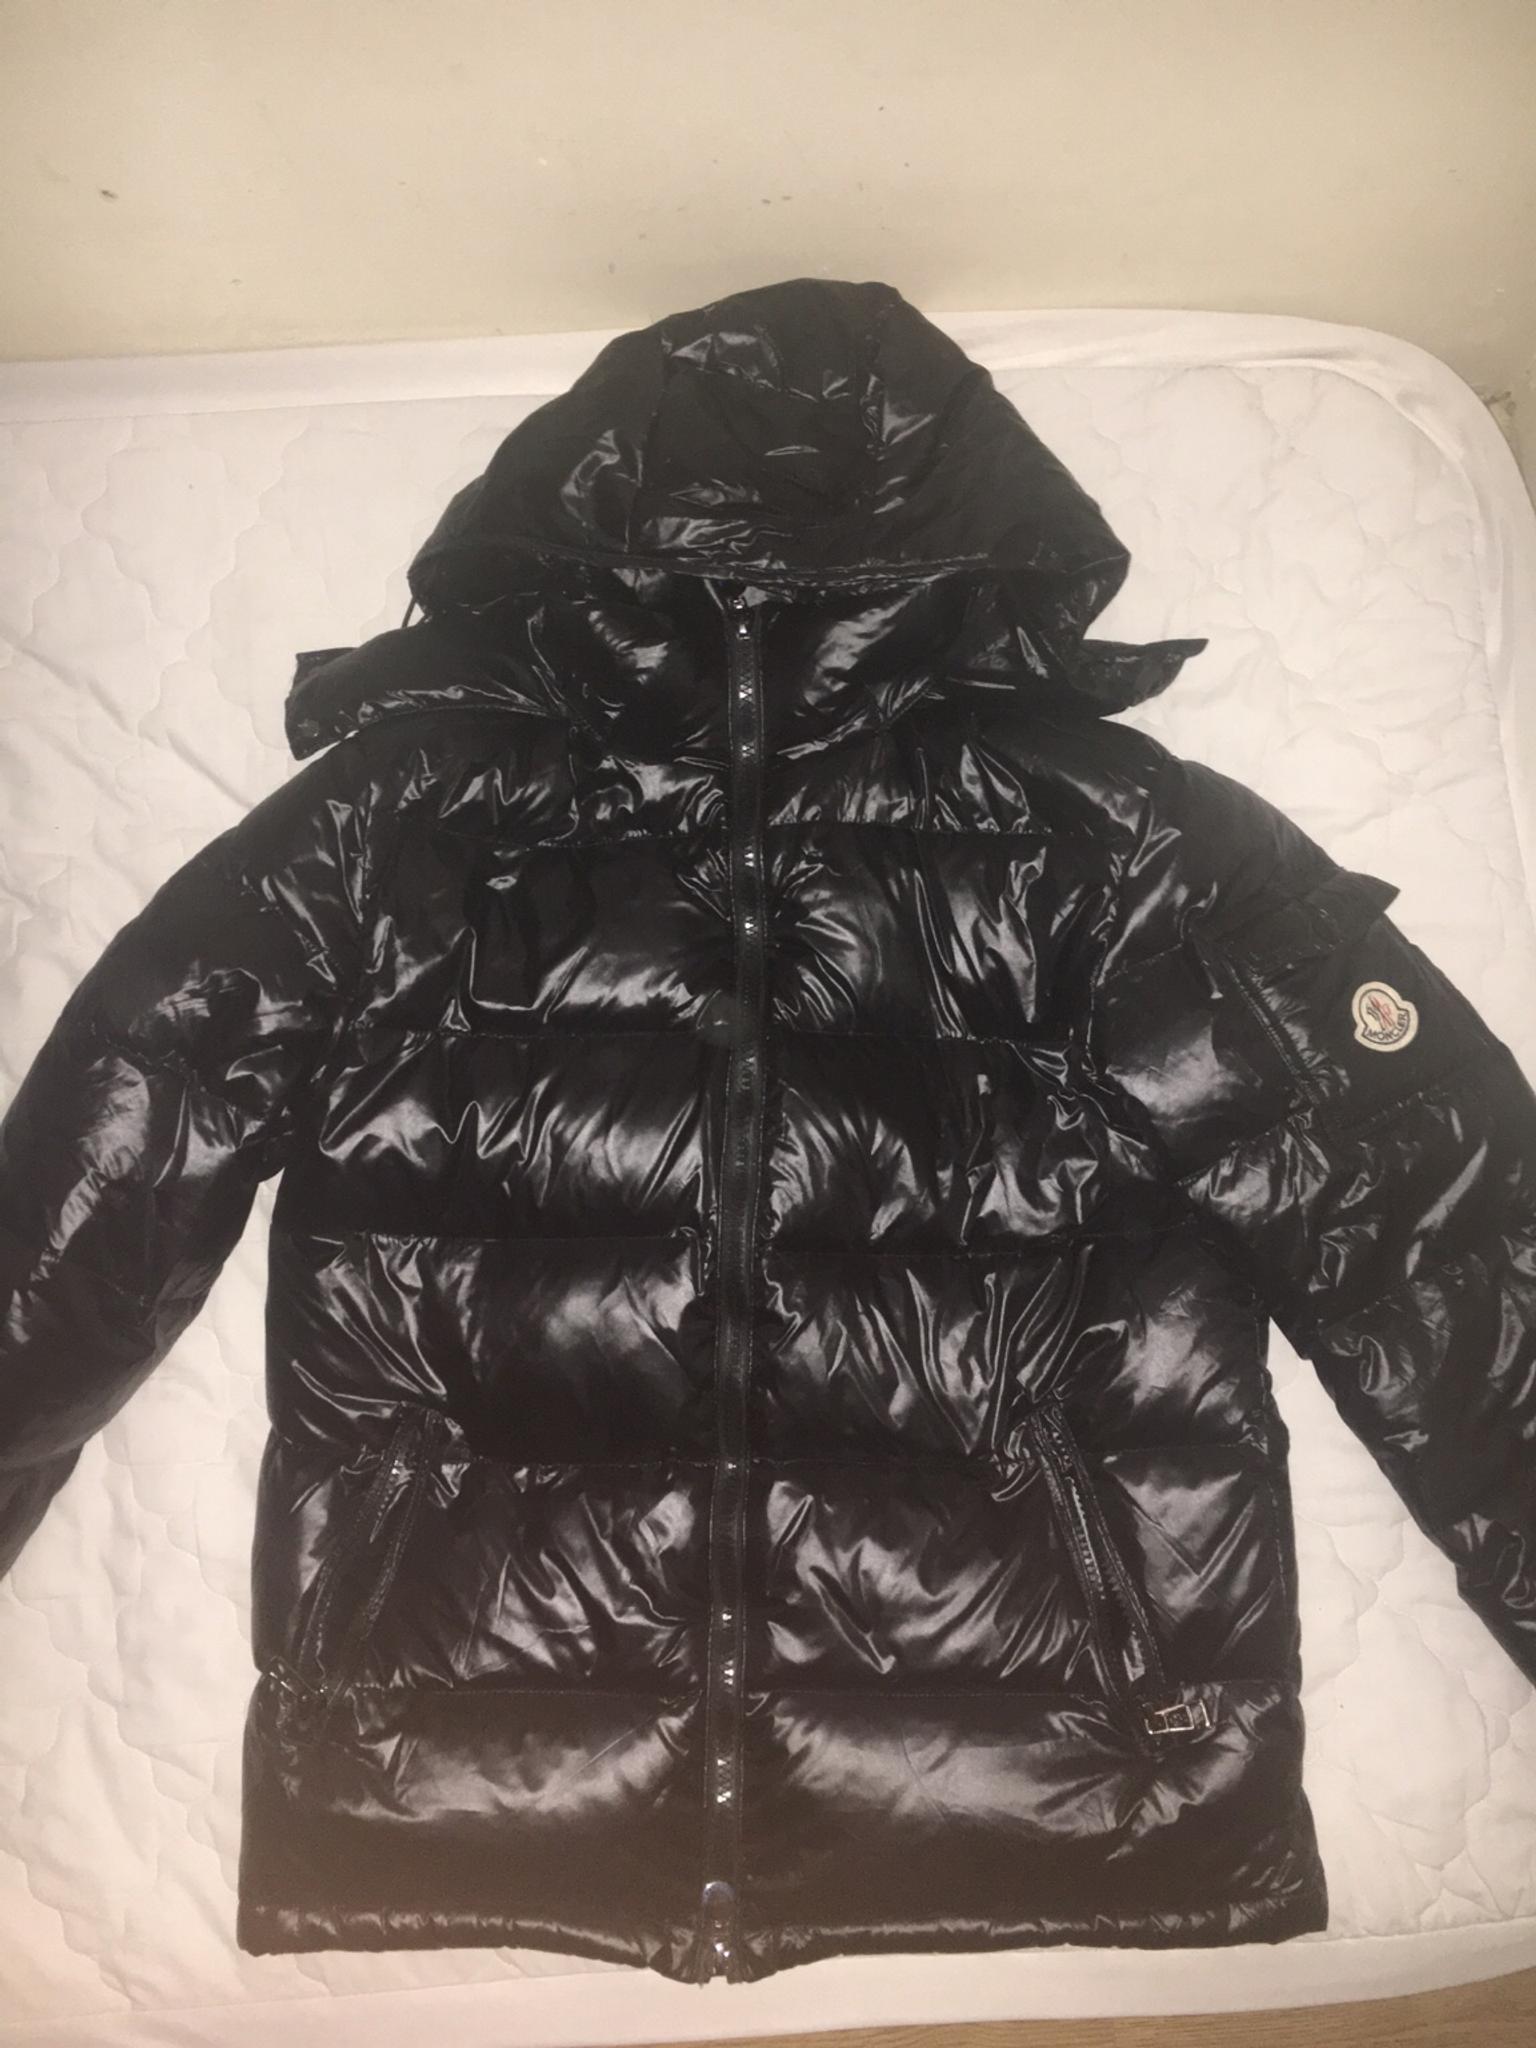 moncler mens cost